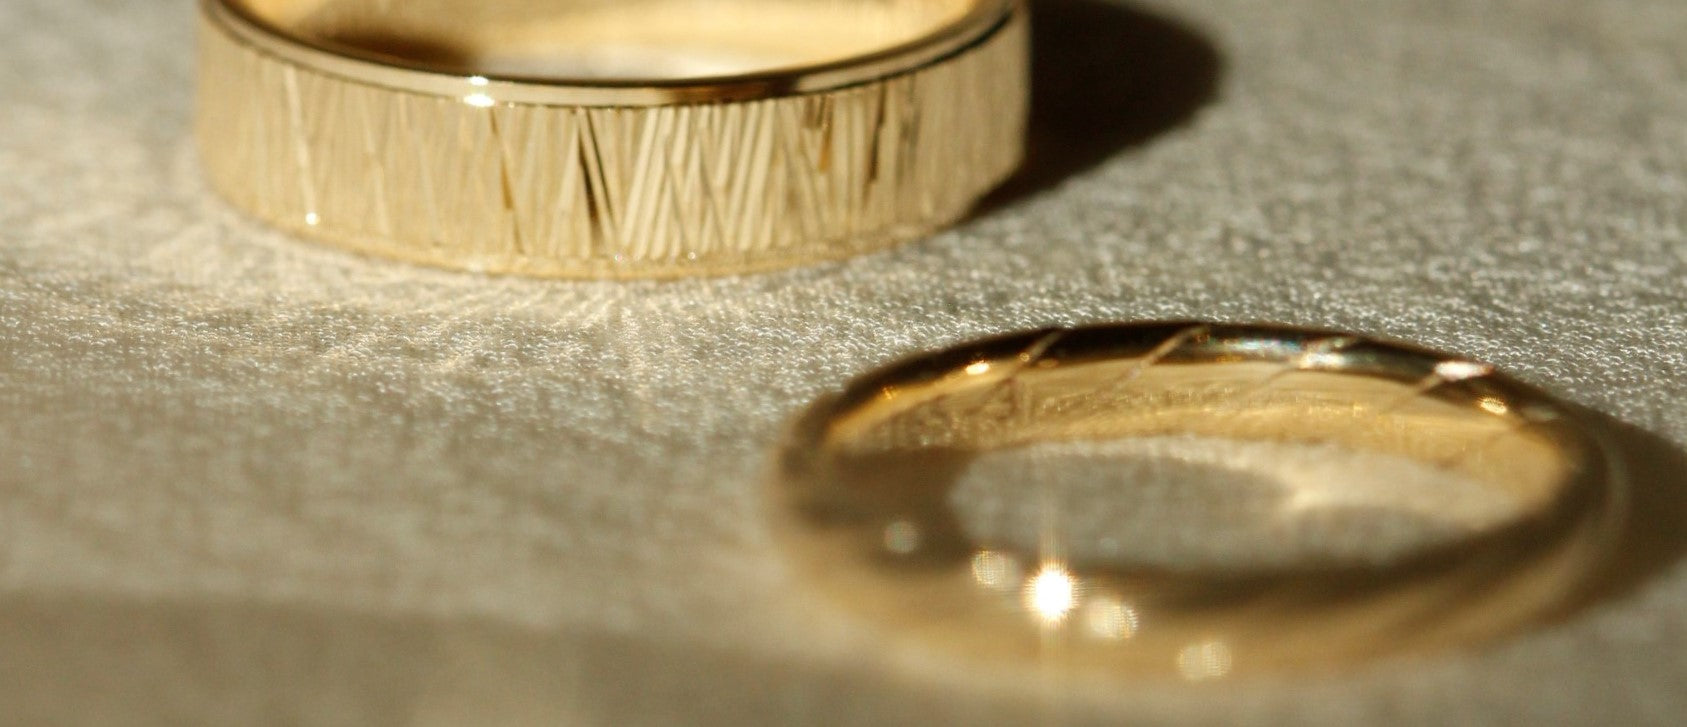 Two Yellow Gold Wedding Rings, one women's and one men's wedding ring made of yellow gold